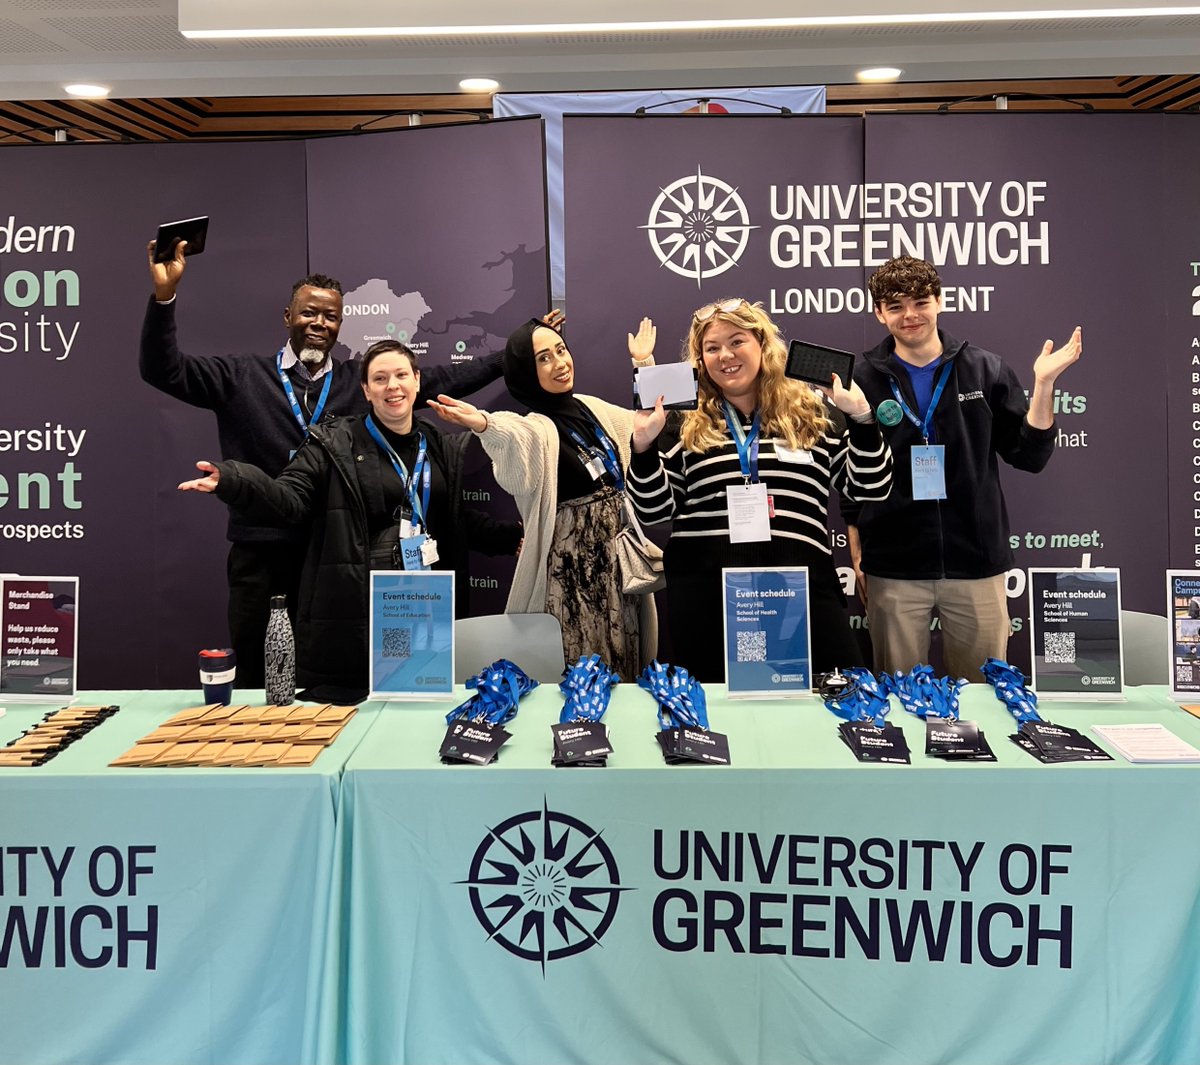 The University of Greenwich open day is today. We can't wait to welcome you at our Avery Hill, Greenwich and Medway campuses. Come along to learn more about our courses in Education, Health and Human Sciences. #ProudToBeGre @UniOfGreenwich